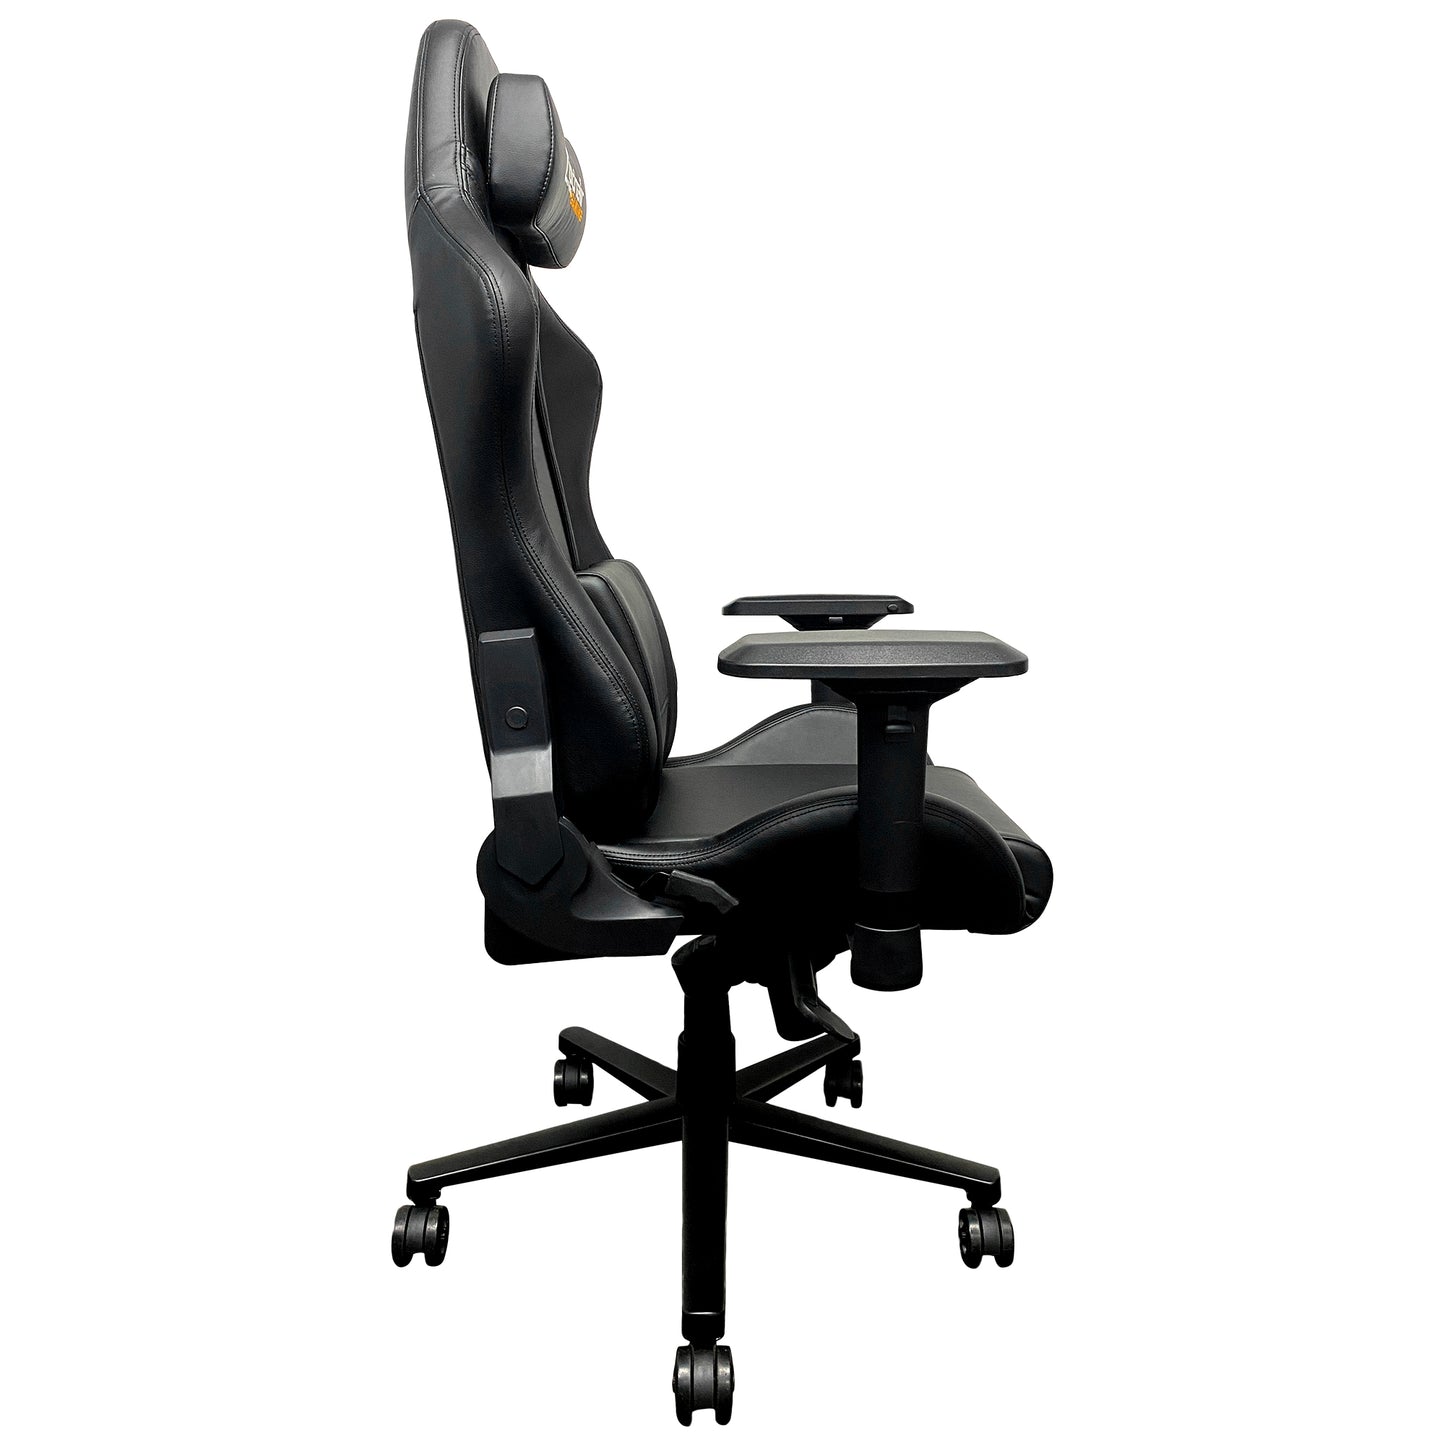 Xpression Pro Gaming Chair with Boise State Broncos Logo